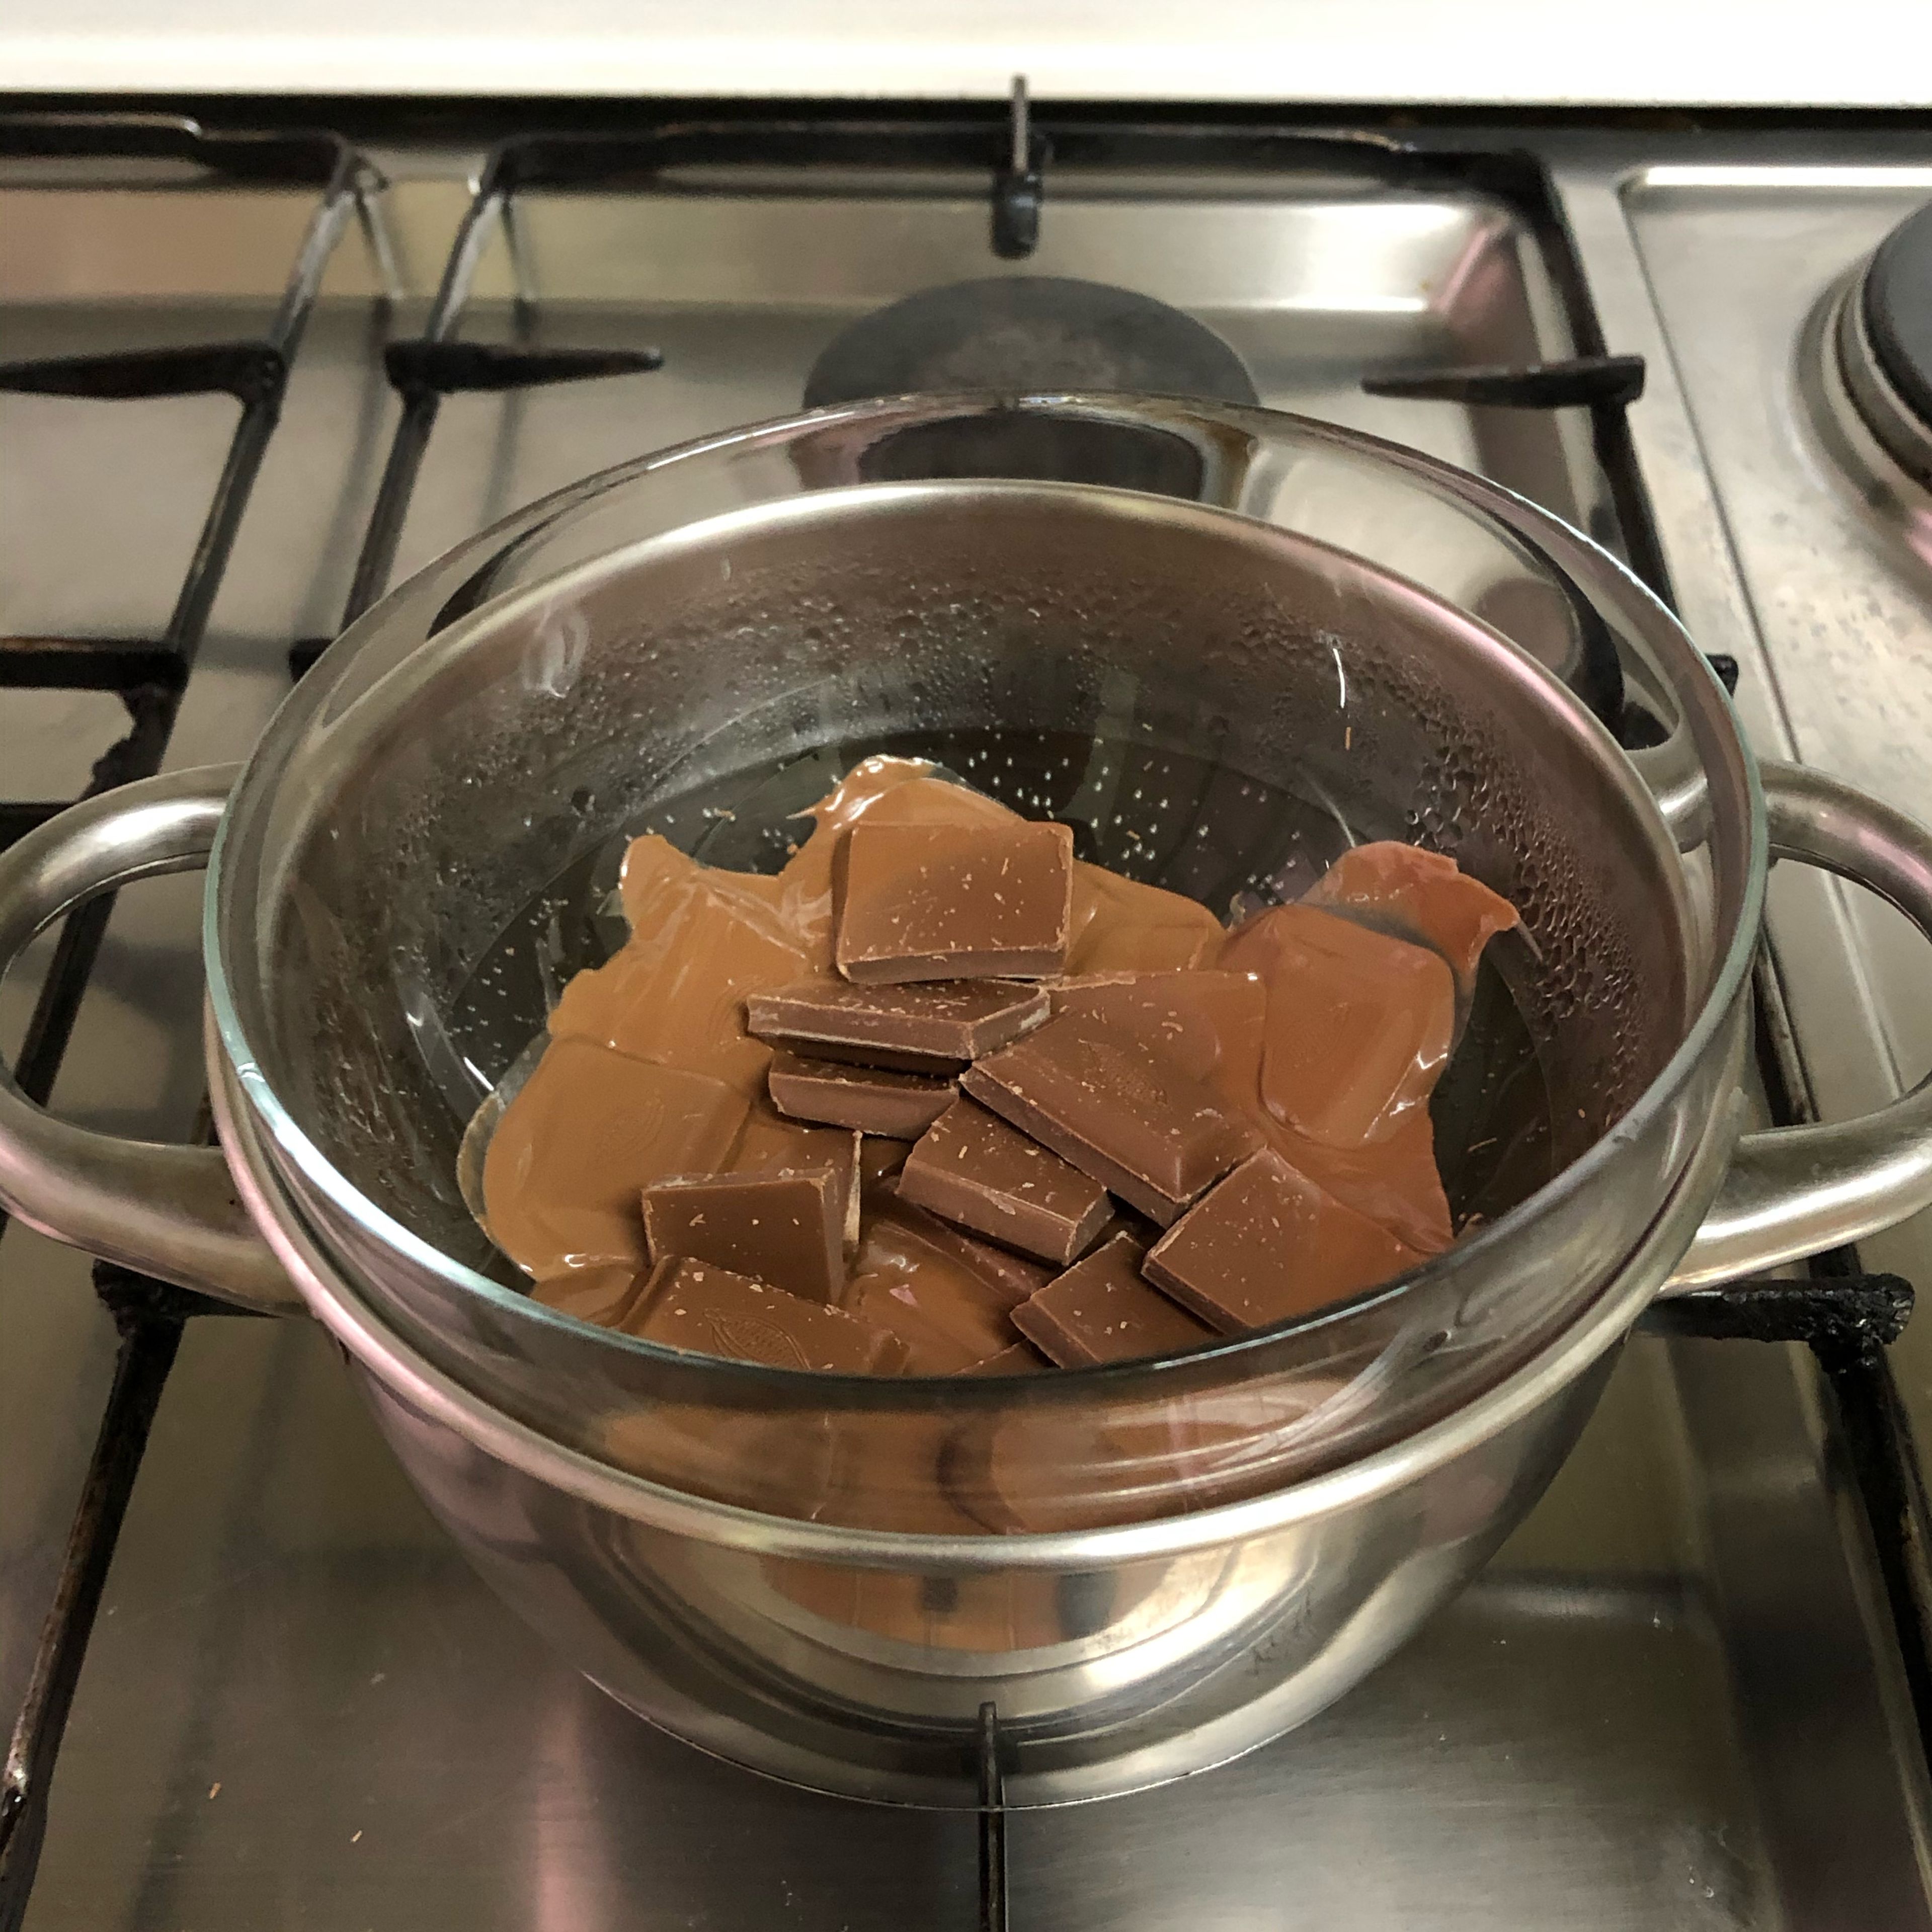 Grab a small pot and fill it with water, half way. Set the stove at medium low heat. Set a bowl on top of it and add your chocolate so it melts properly.